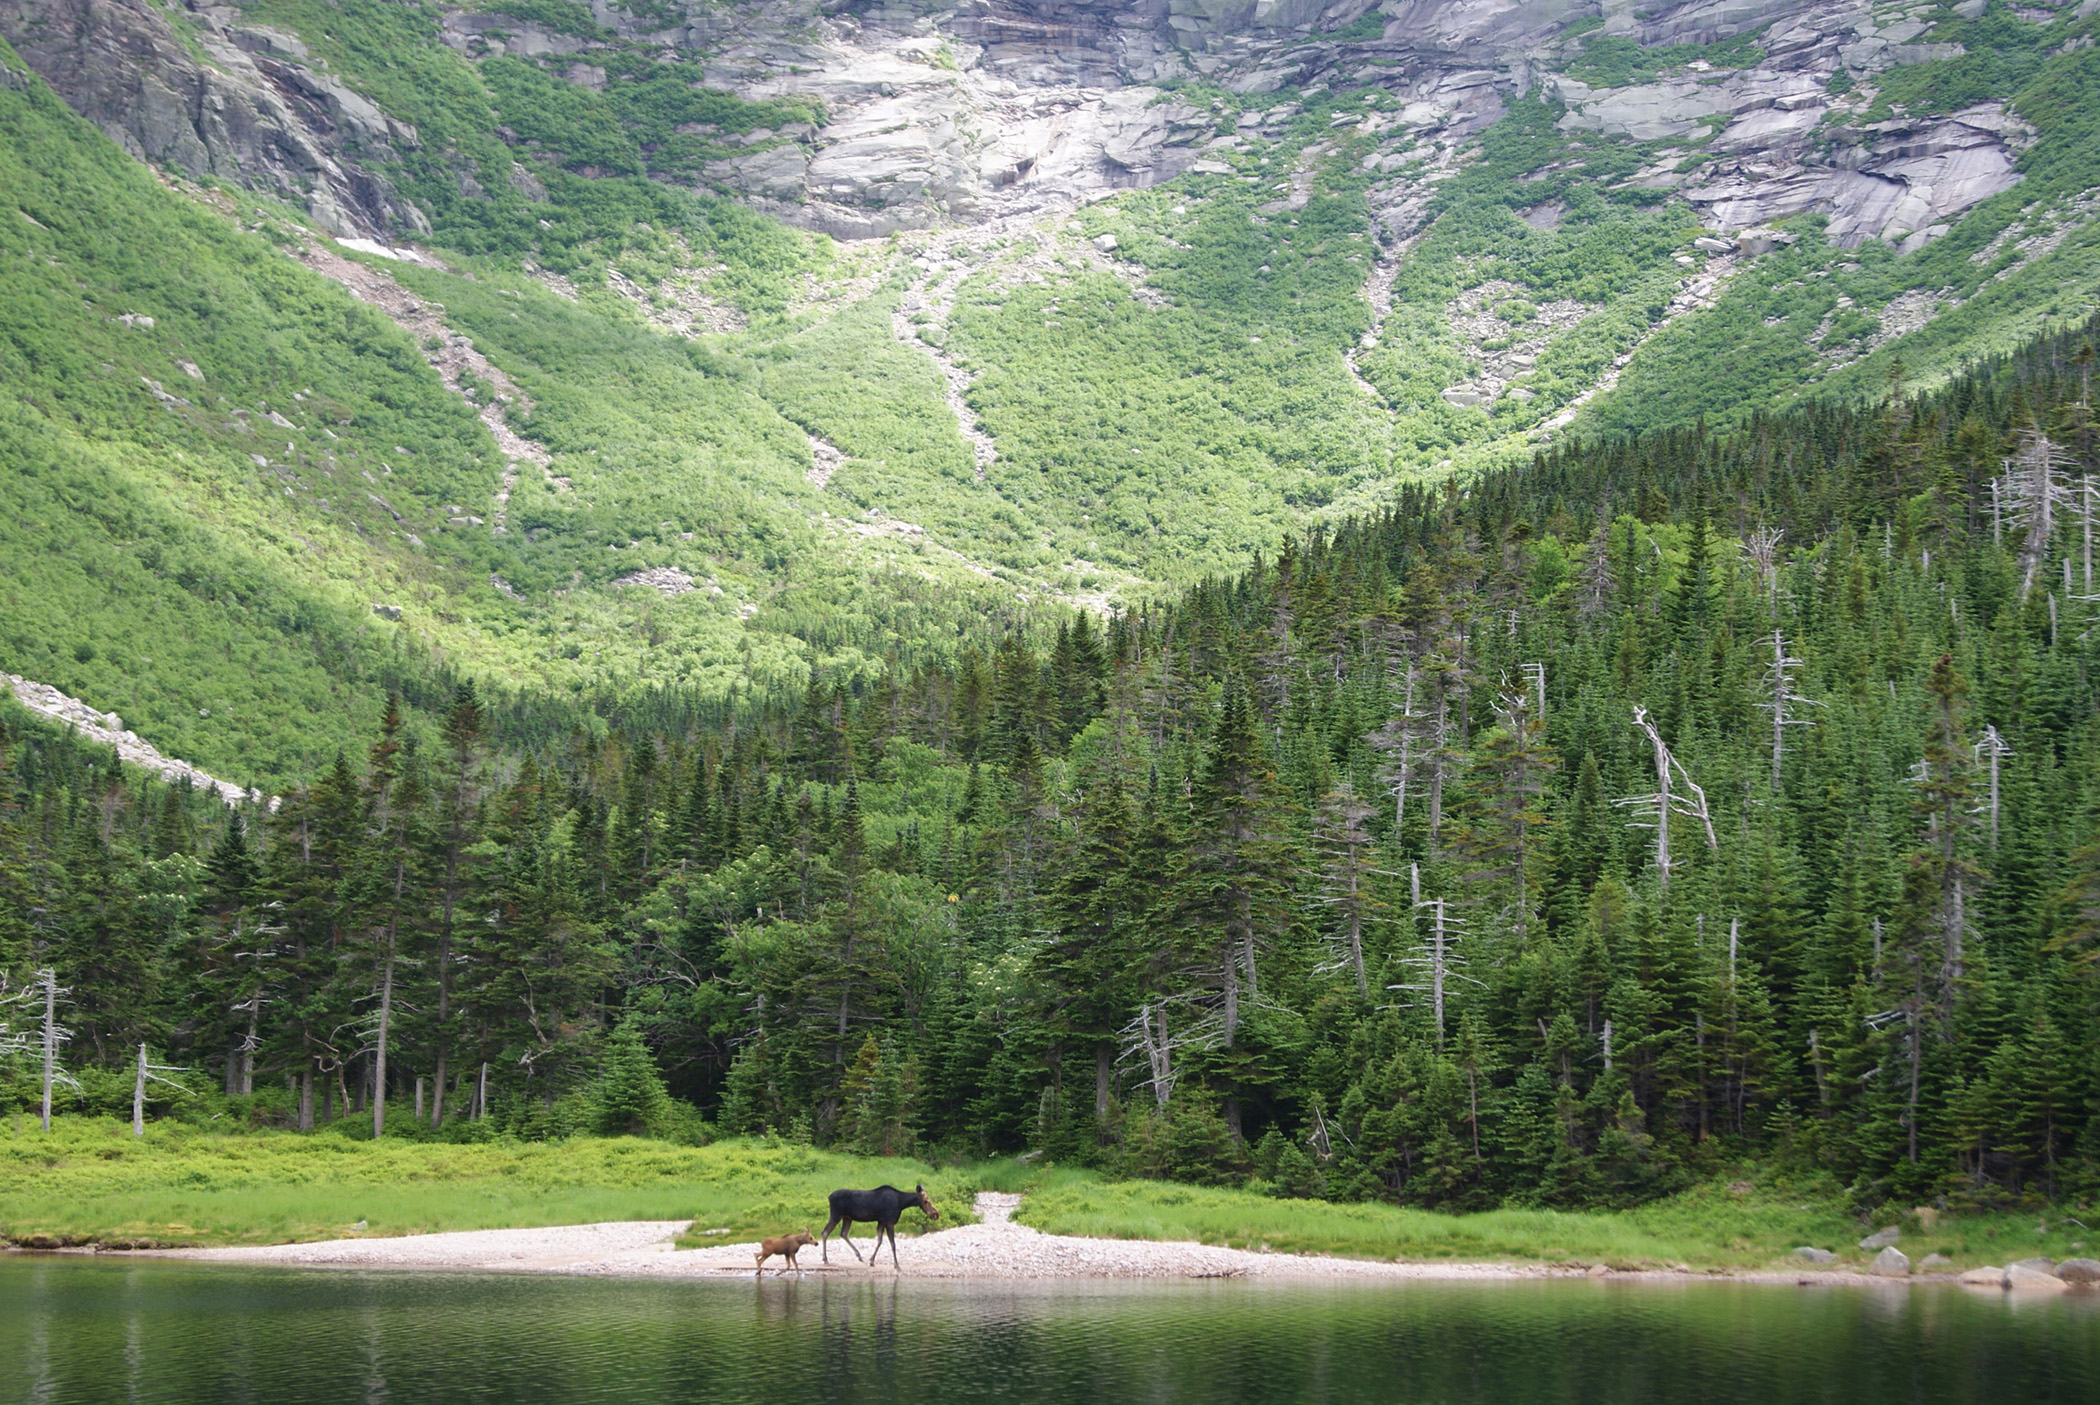 Baby and Mother Moose in Baxter State Park, Maine (user submitted)